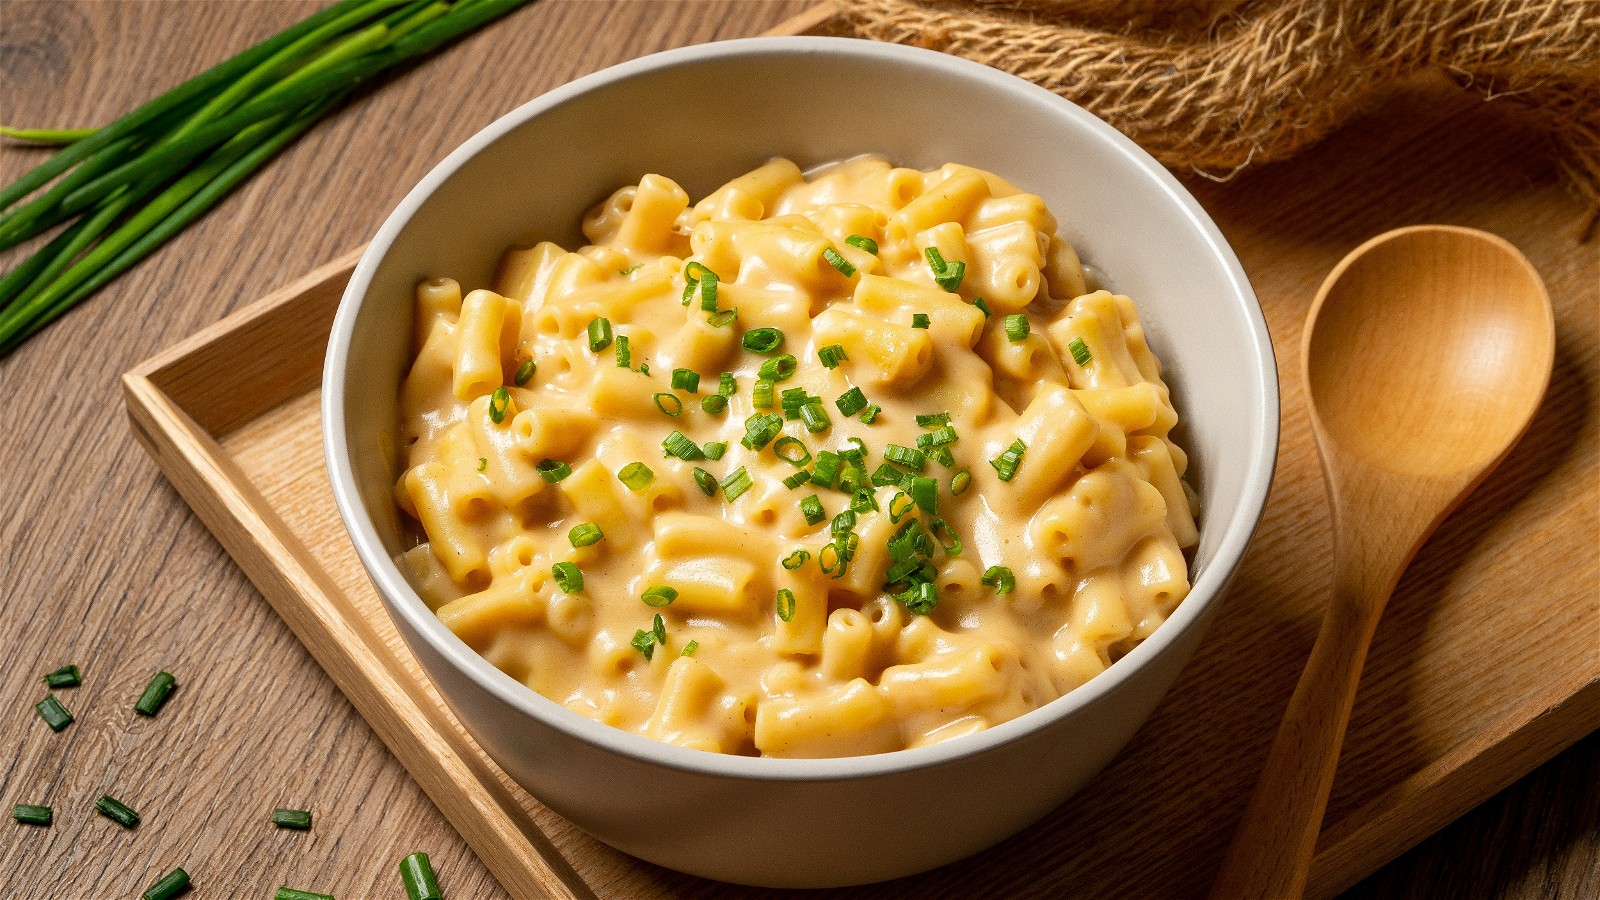 Image of Rustic Homemade Mac And Cheese Recipe